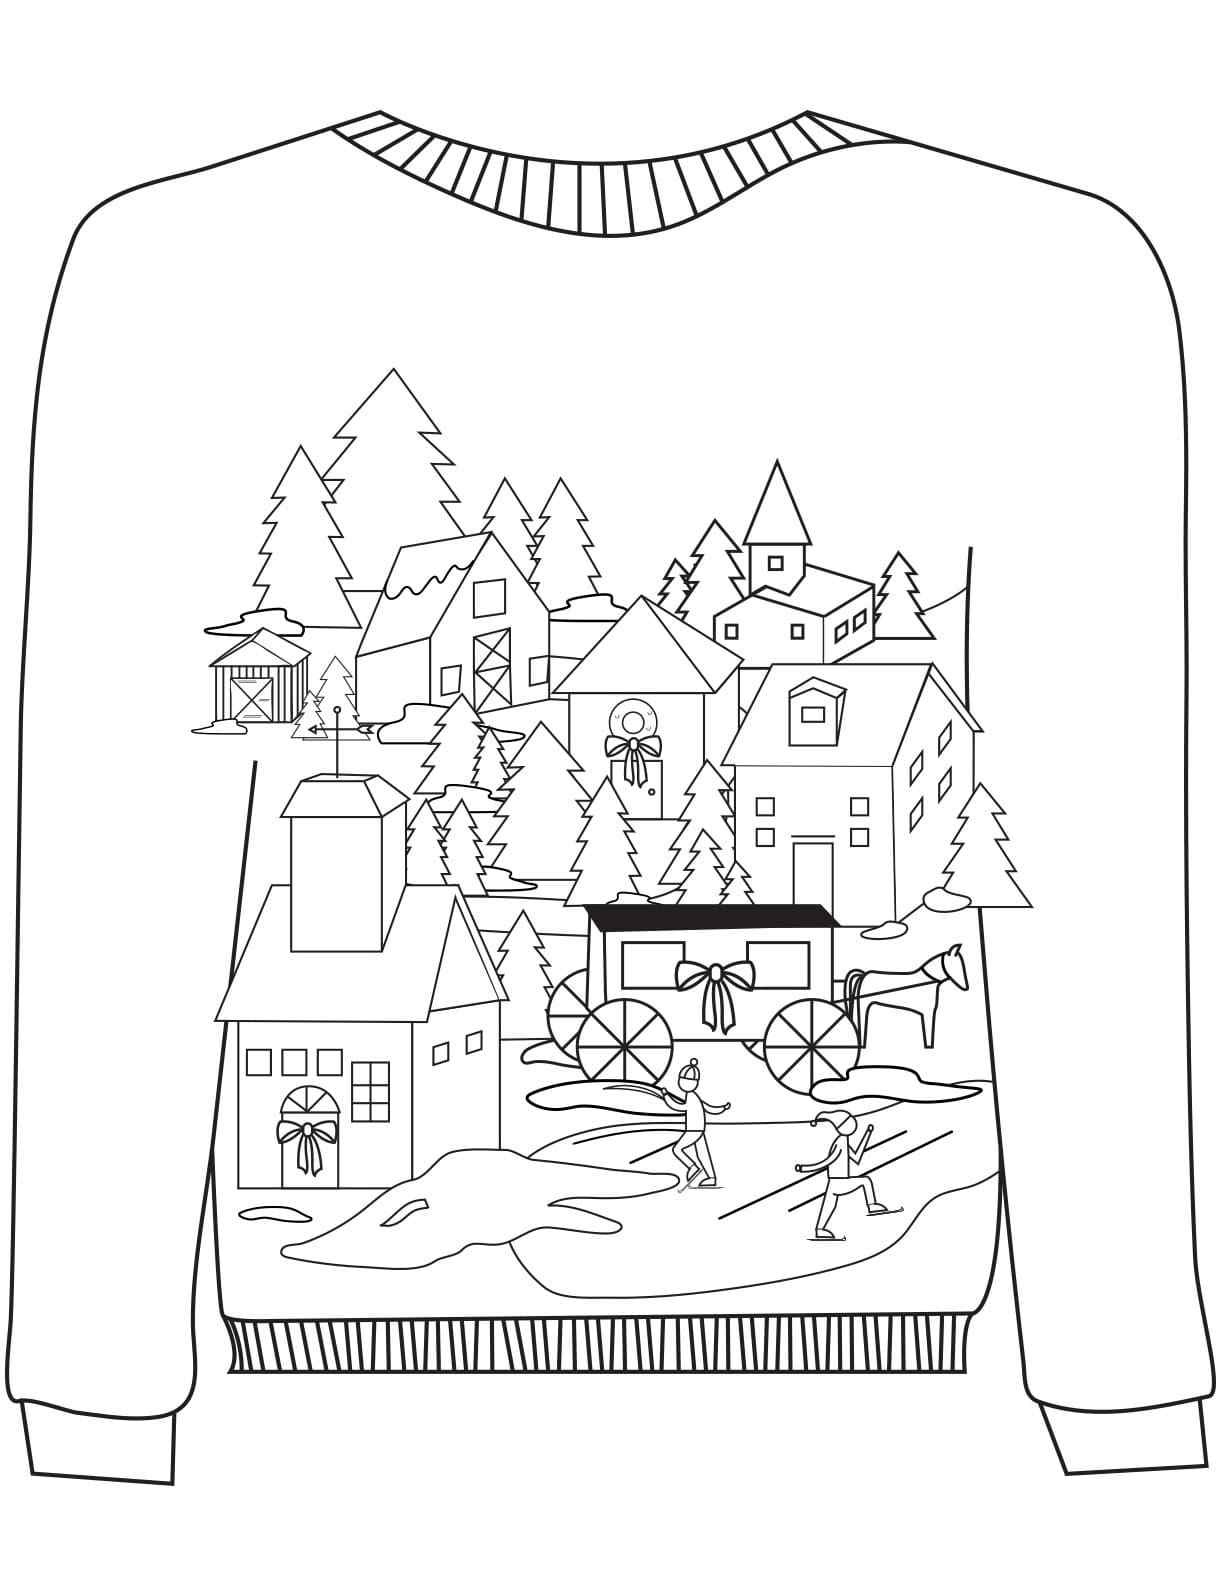 The Whole Village On One Sweater